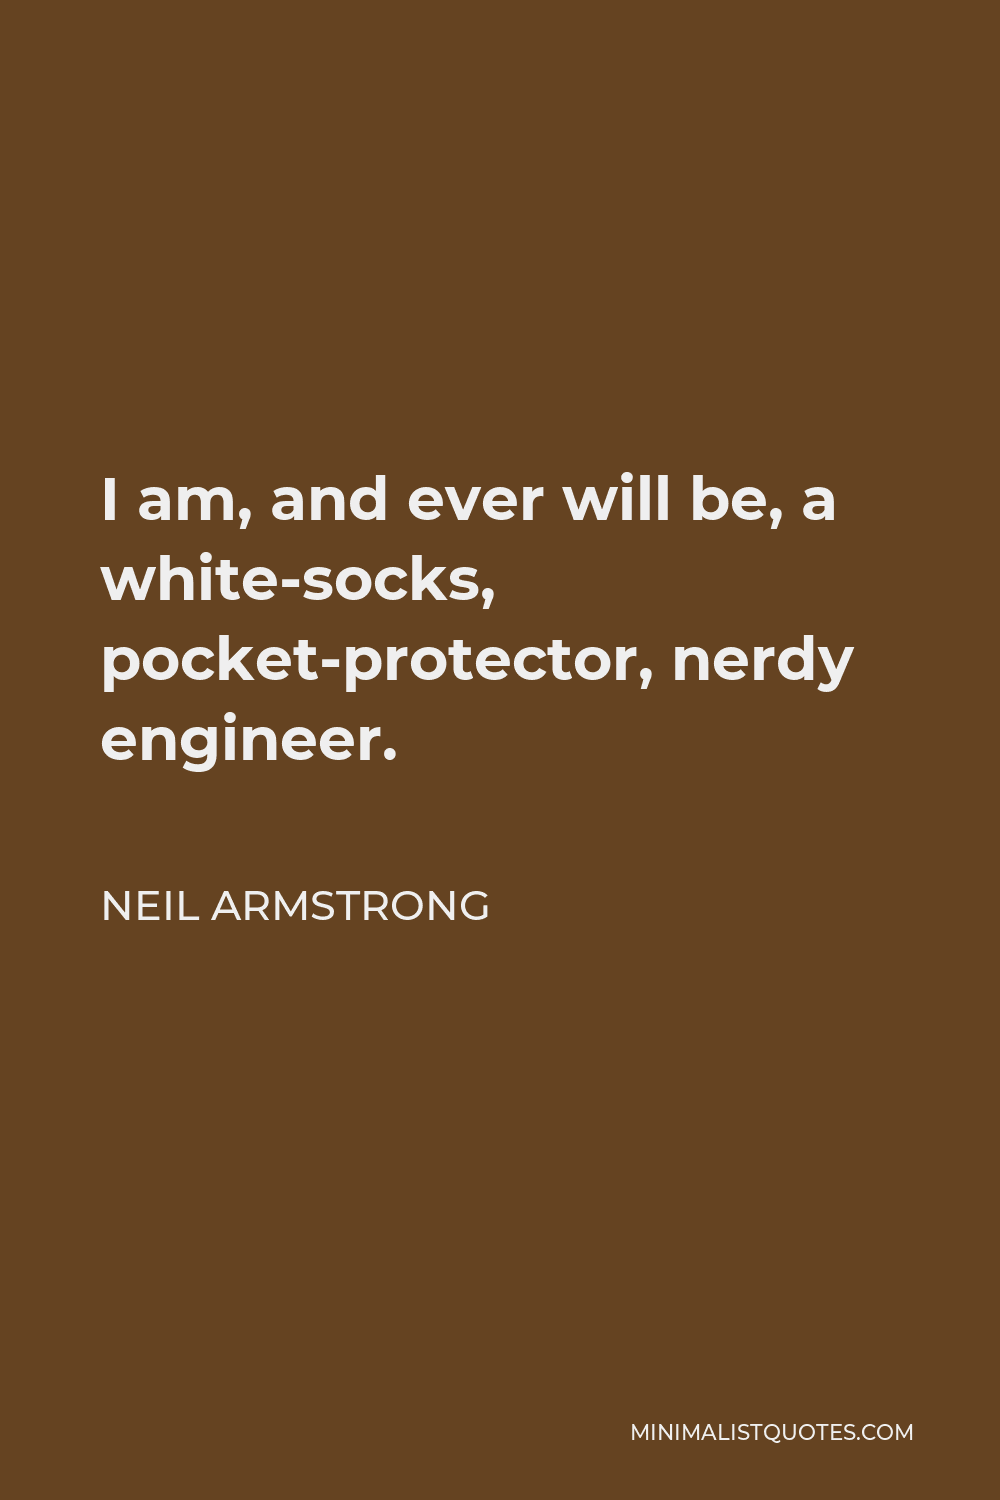 Neil Armstrong Quote - I am, and ever will be, a white-socks, pocket-protector, nerdy engineer.